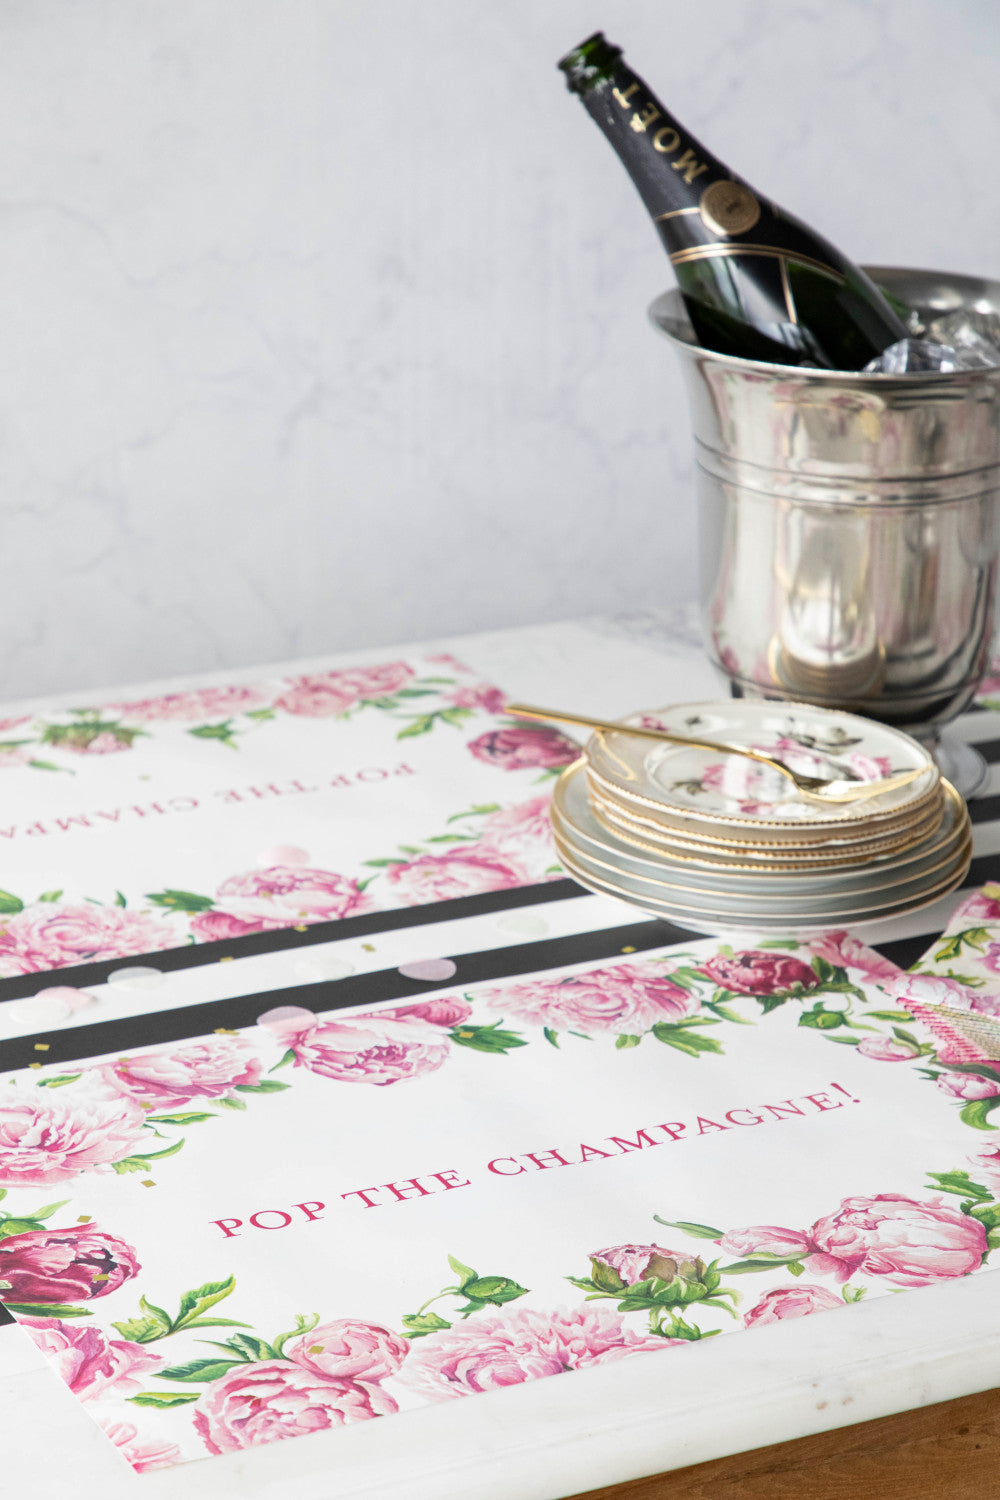 The Peony Personalized Placemat under a festive table setting, with &quot;POP THE CHAMPAGNE!&quot; printed in deep pink.